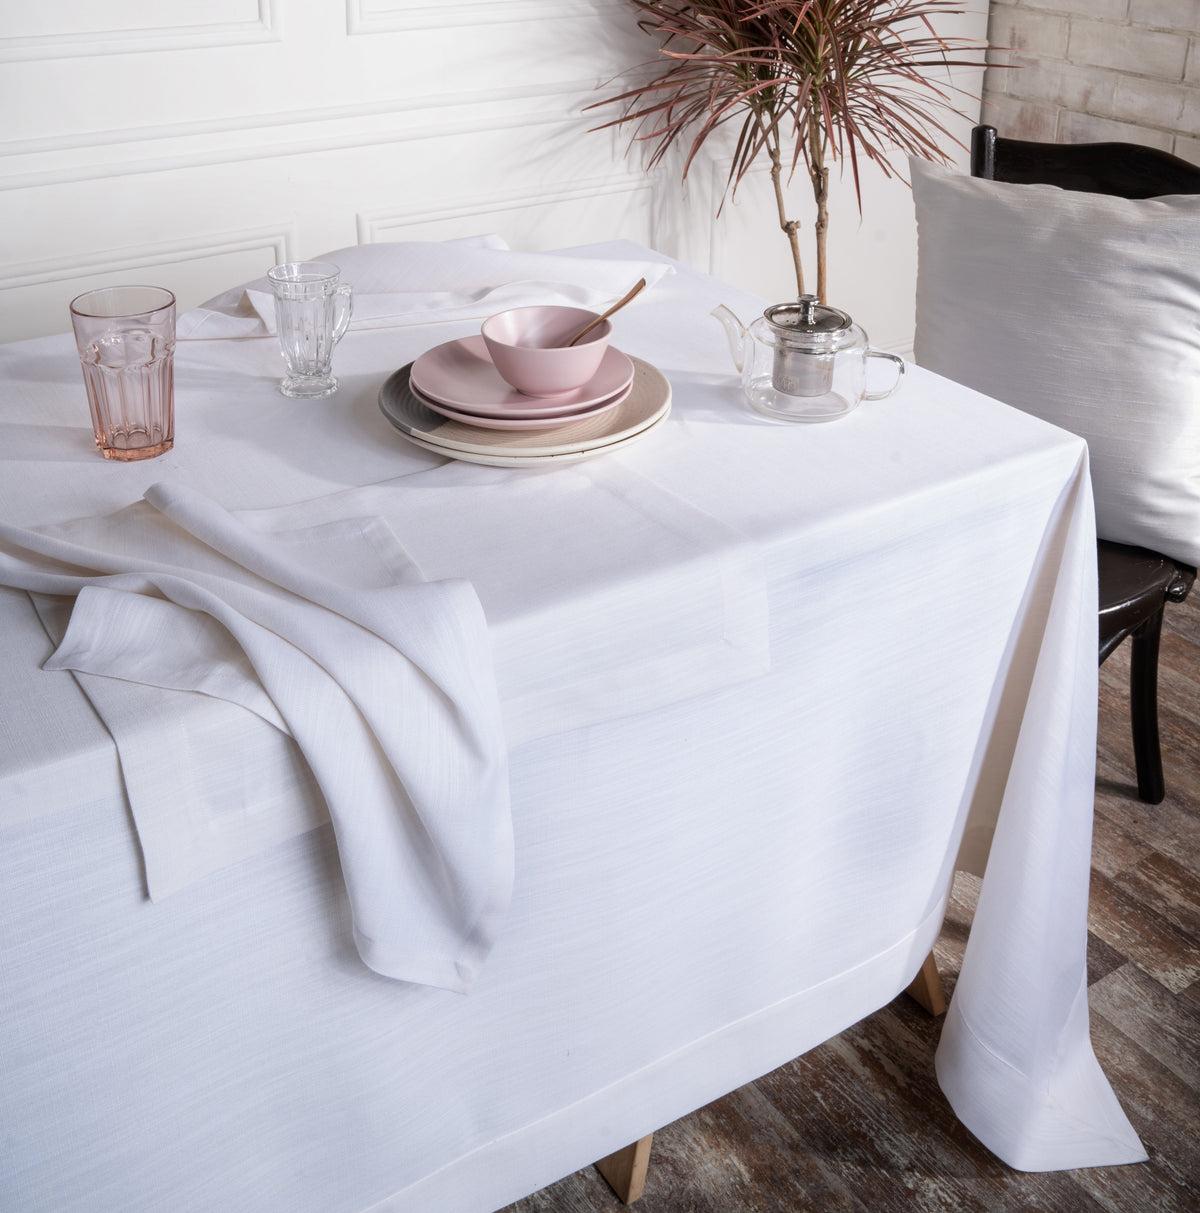 Chambray Cream and White Linen Textured Tablecloth - Mitered Corner